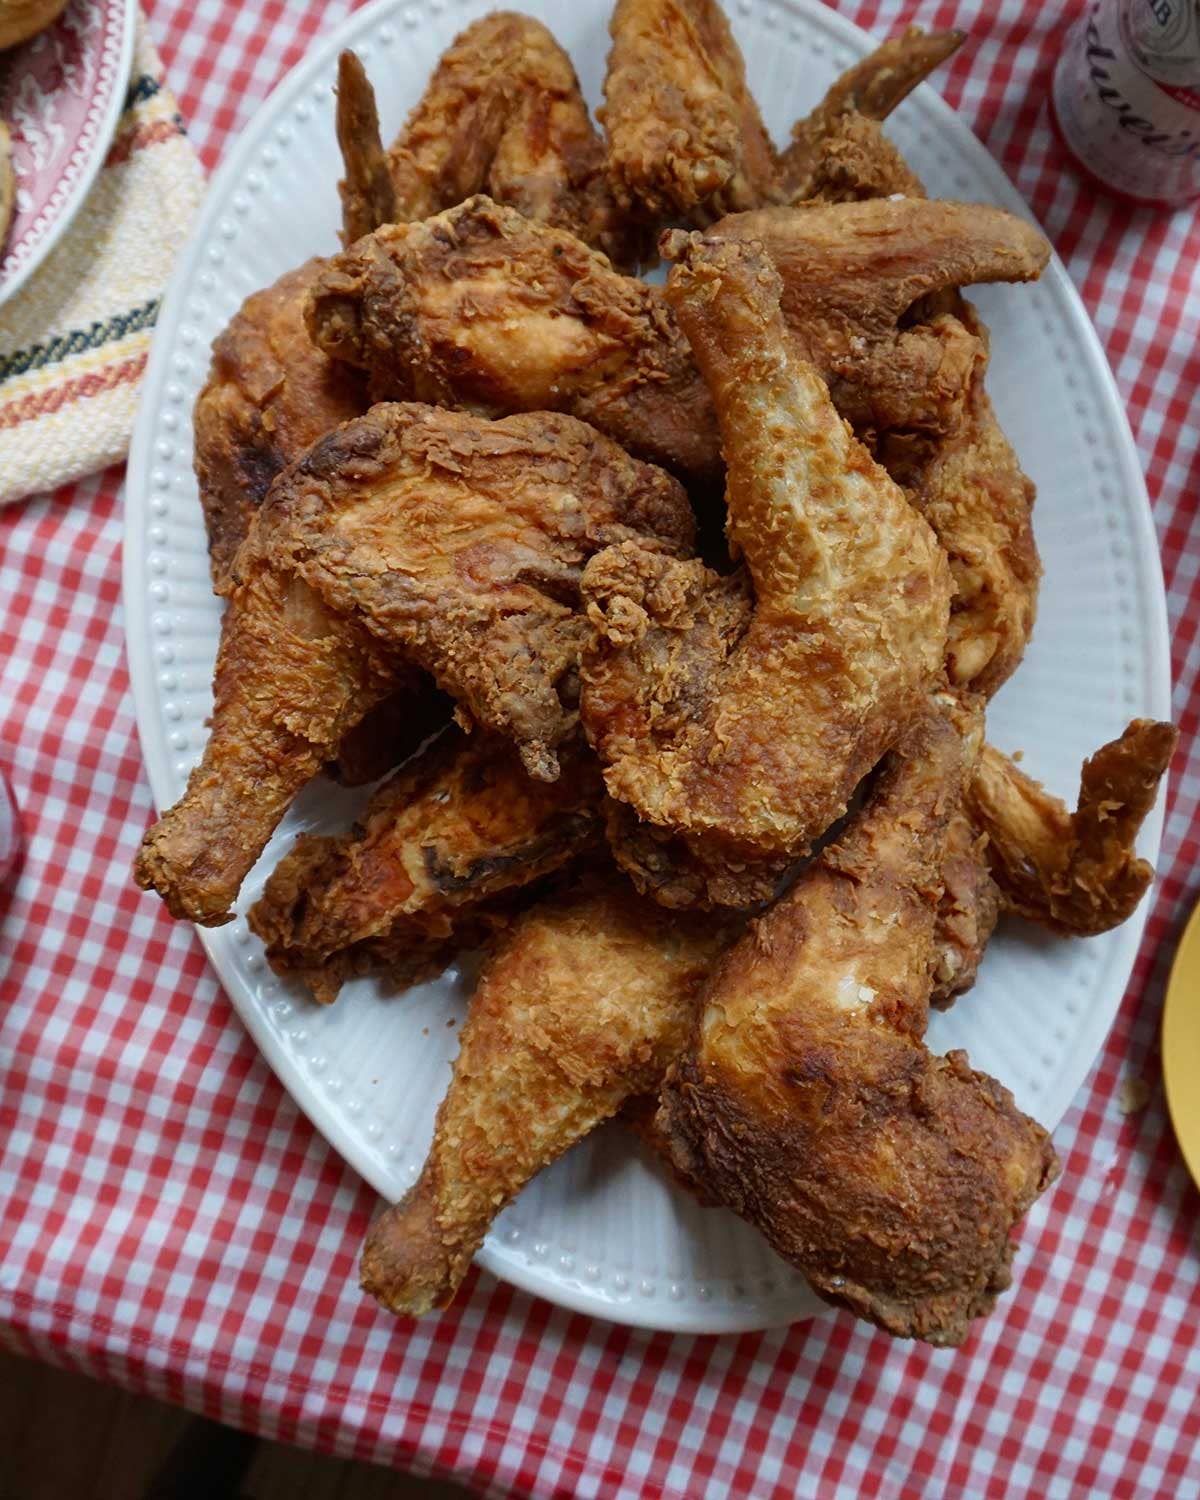 How To Make Our Readers’ Favorite Fried Chicken Recipe